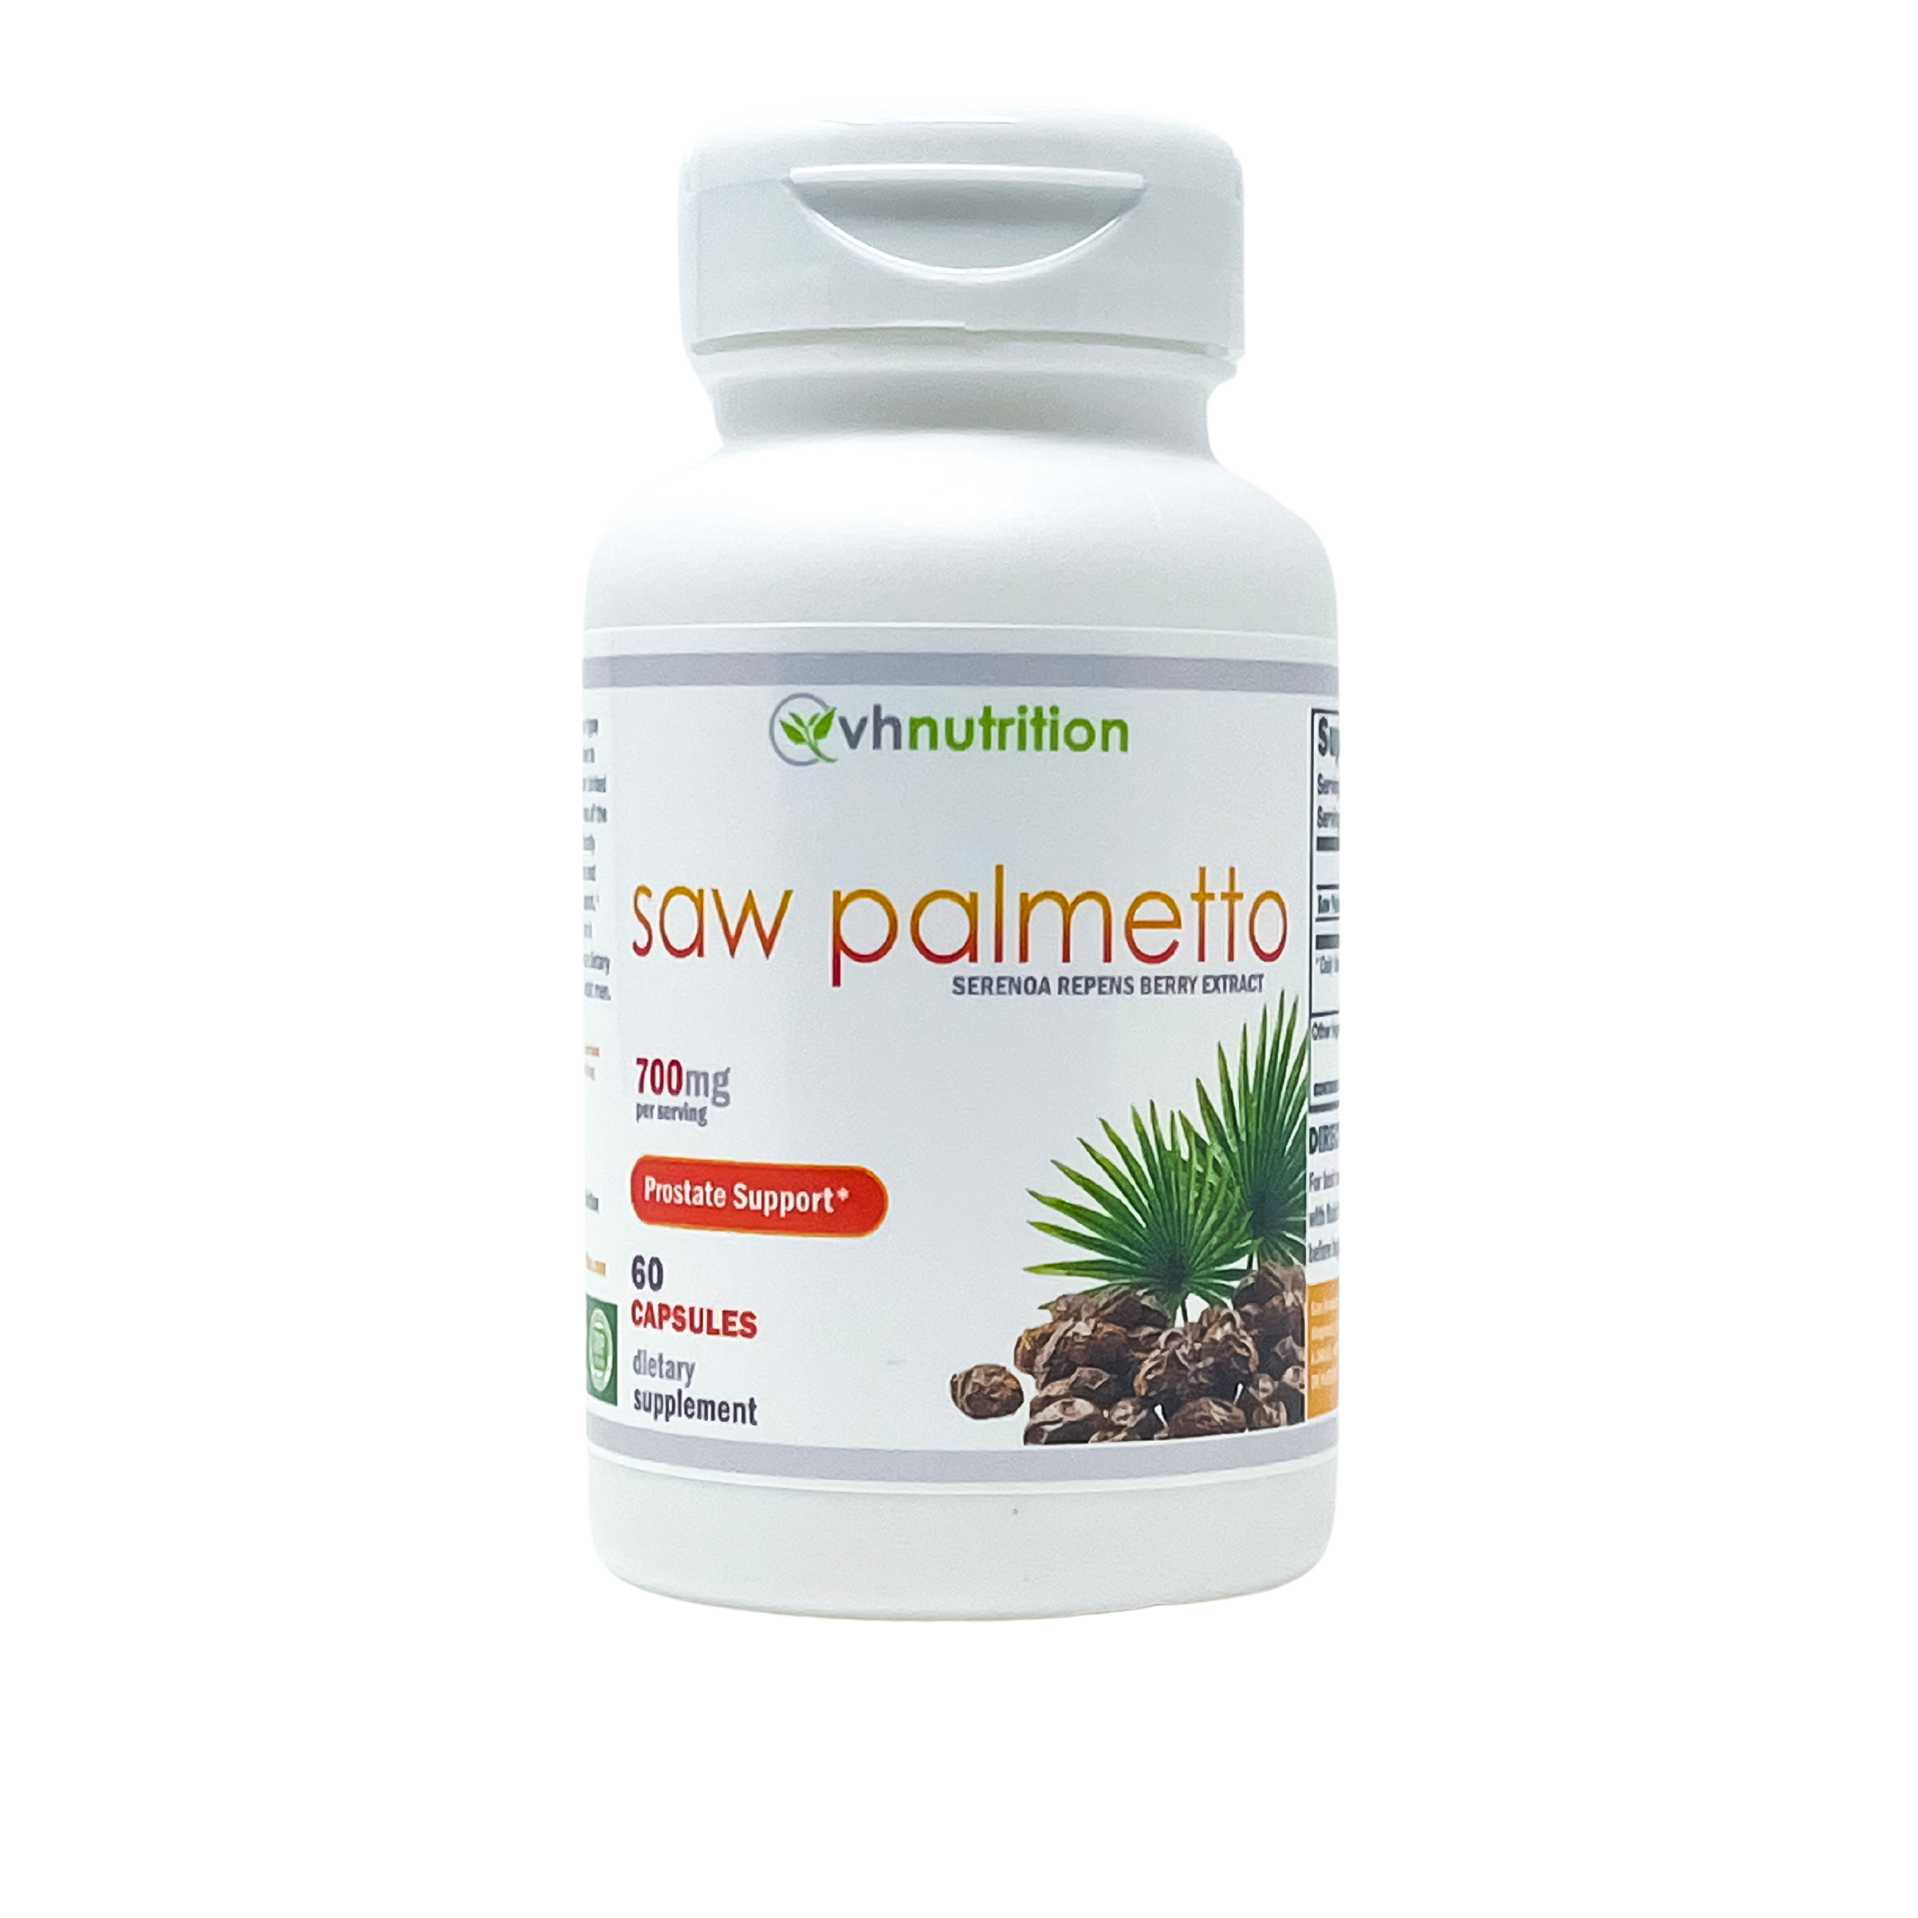 VH Nutrition SAW PALMETTO | Serenoa repens berry Capsules | Prostate and Reproductive Support Supplement for Men* | 700mg per serving 60 Capsules | Standardized Saw Palmetto Extract